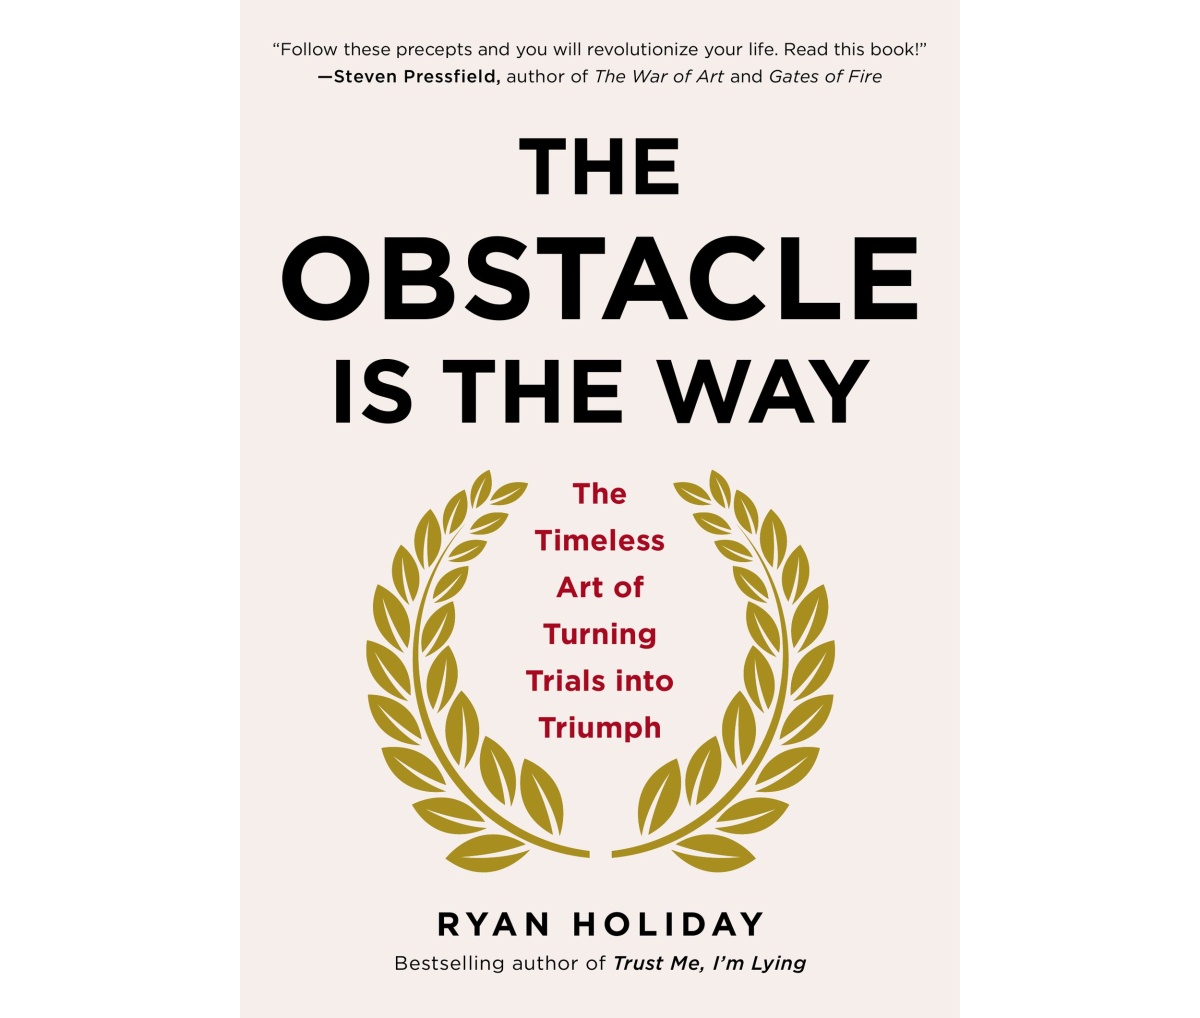 The Obstacle is the Way by Ryan Holiday.